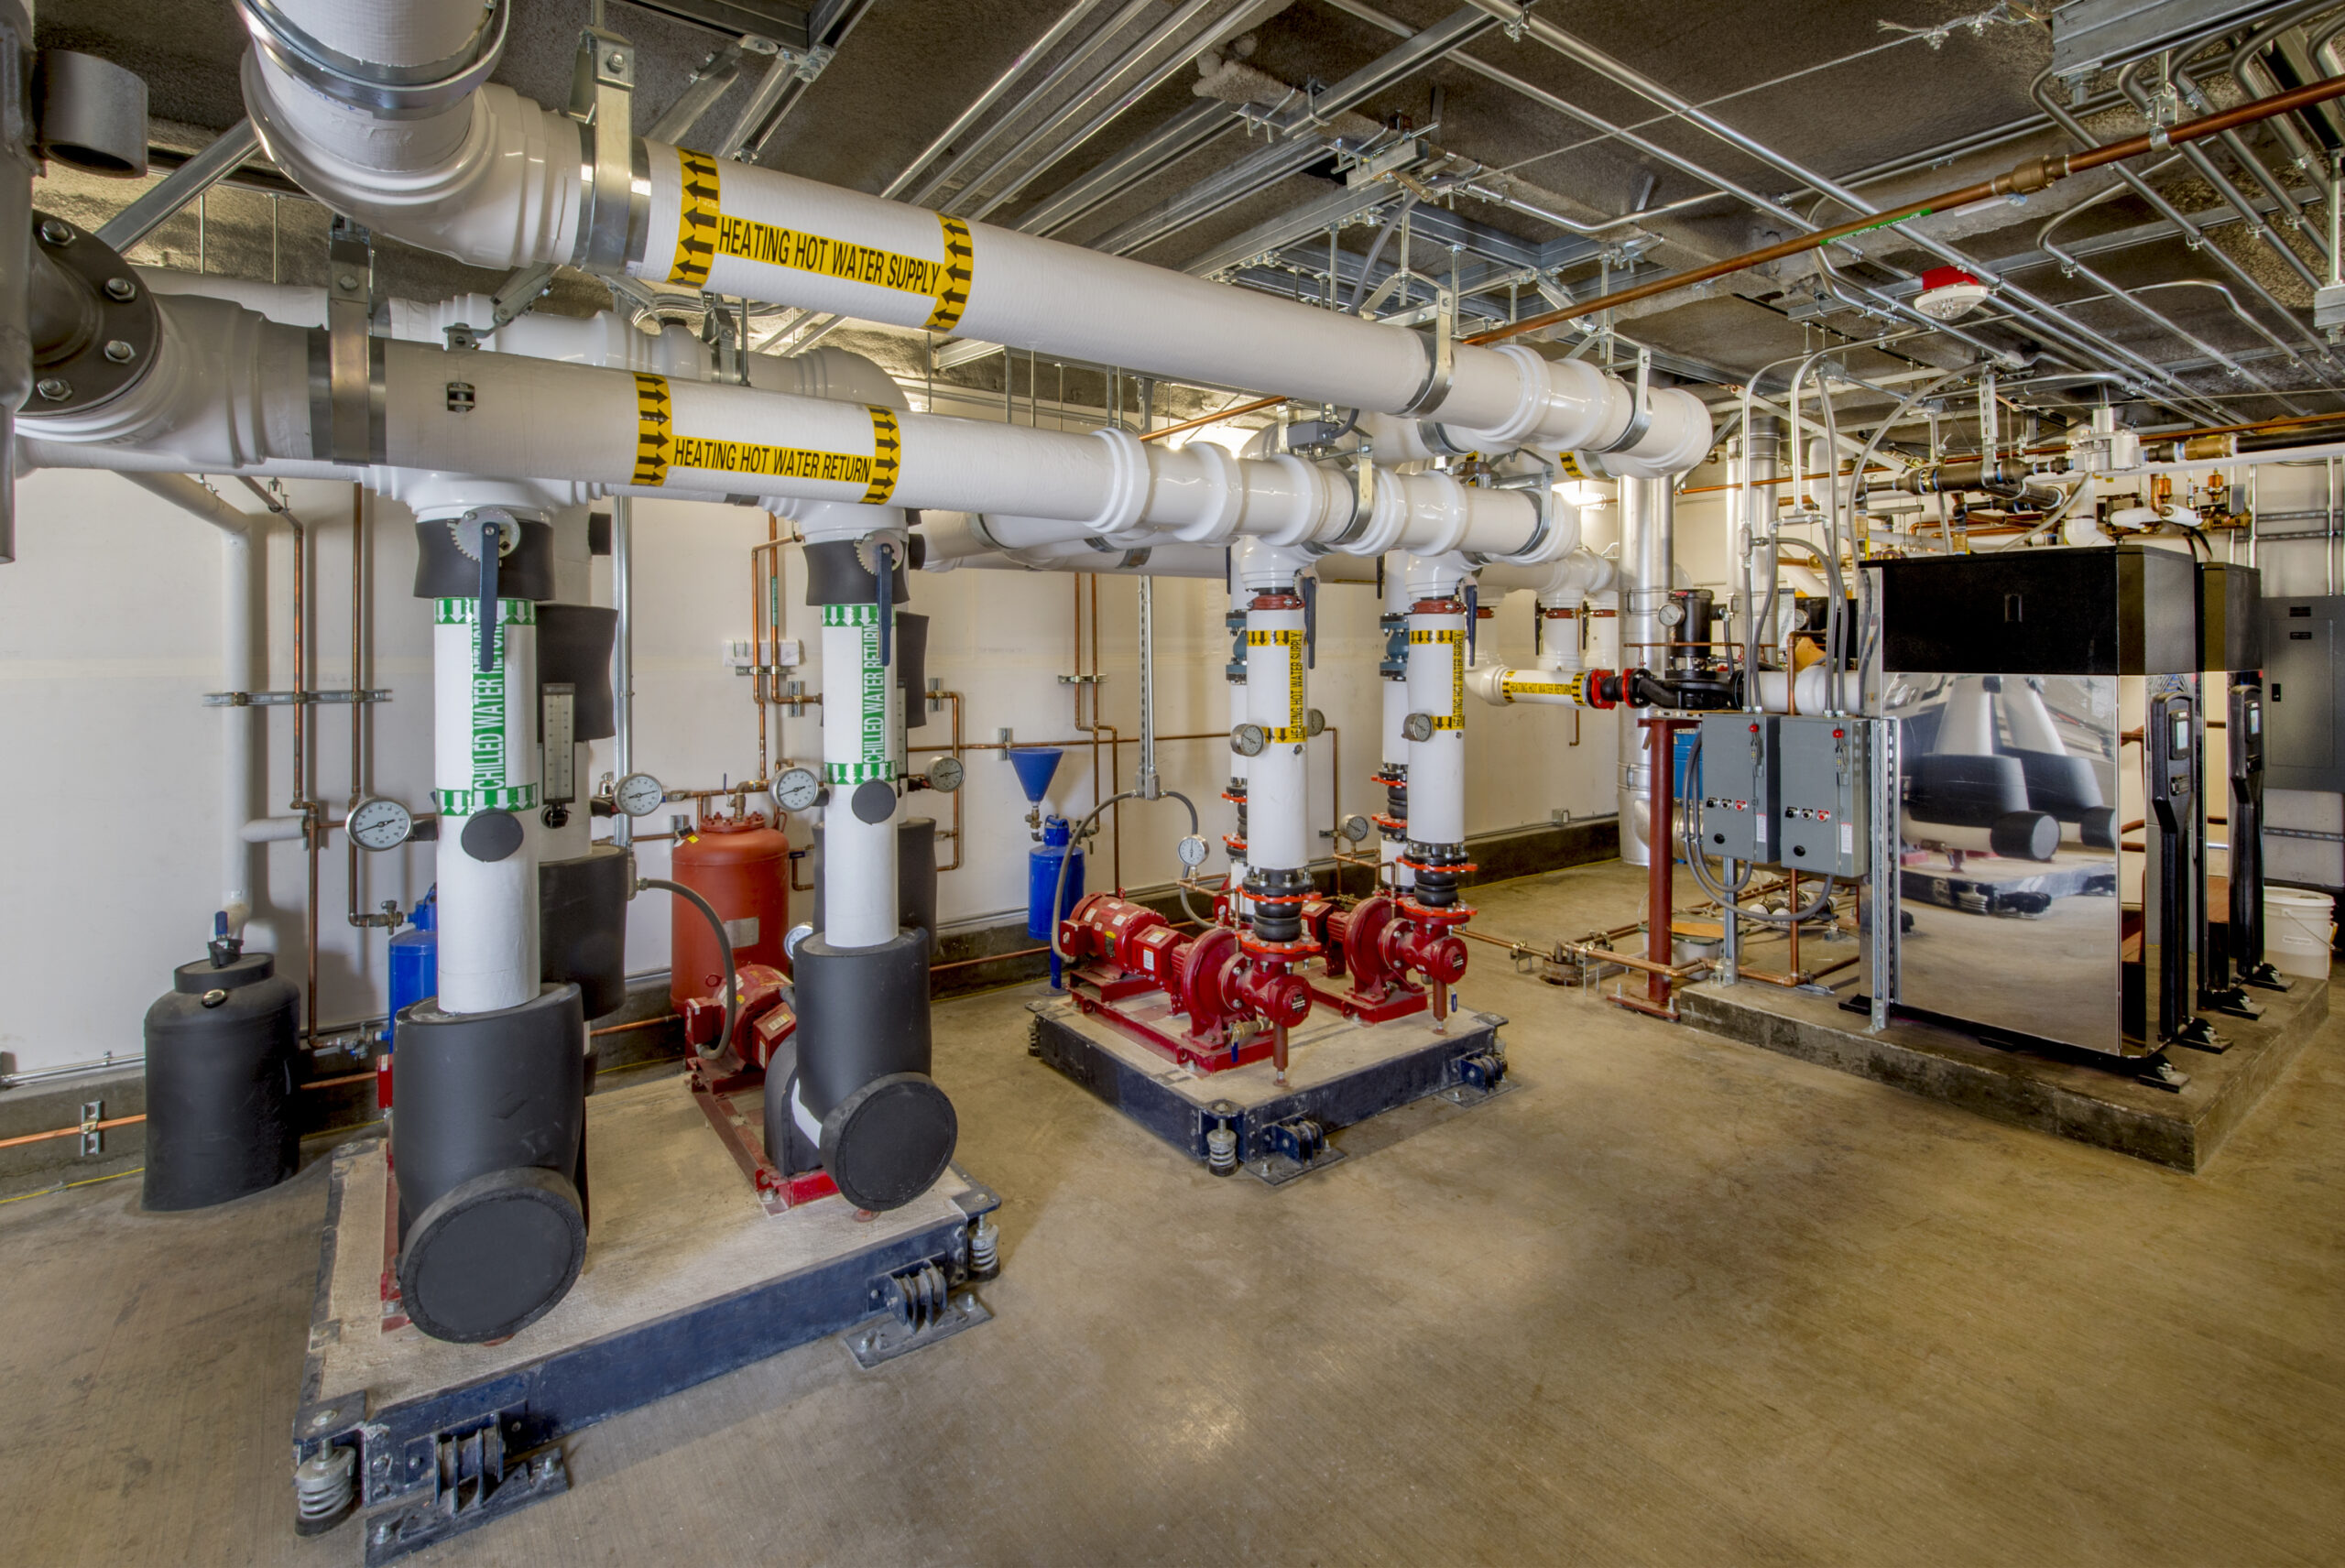 Boiler room with water circulating pumps and associated plumbing.